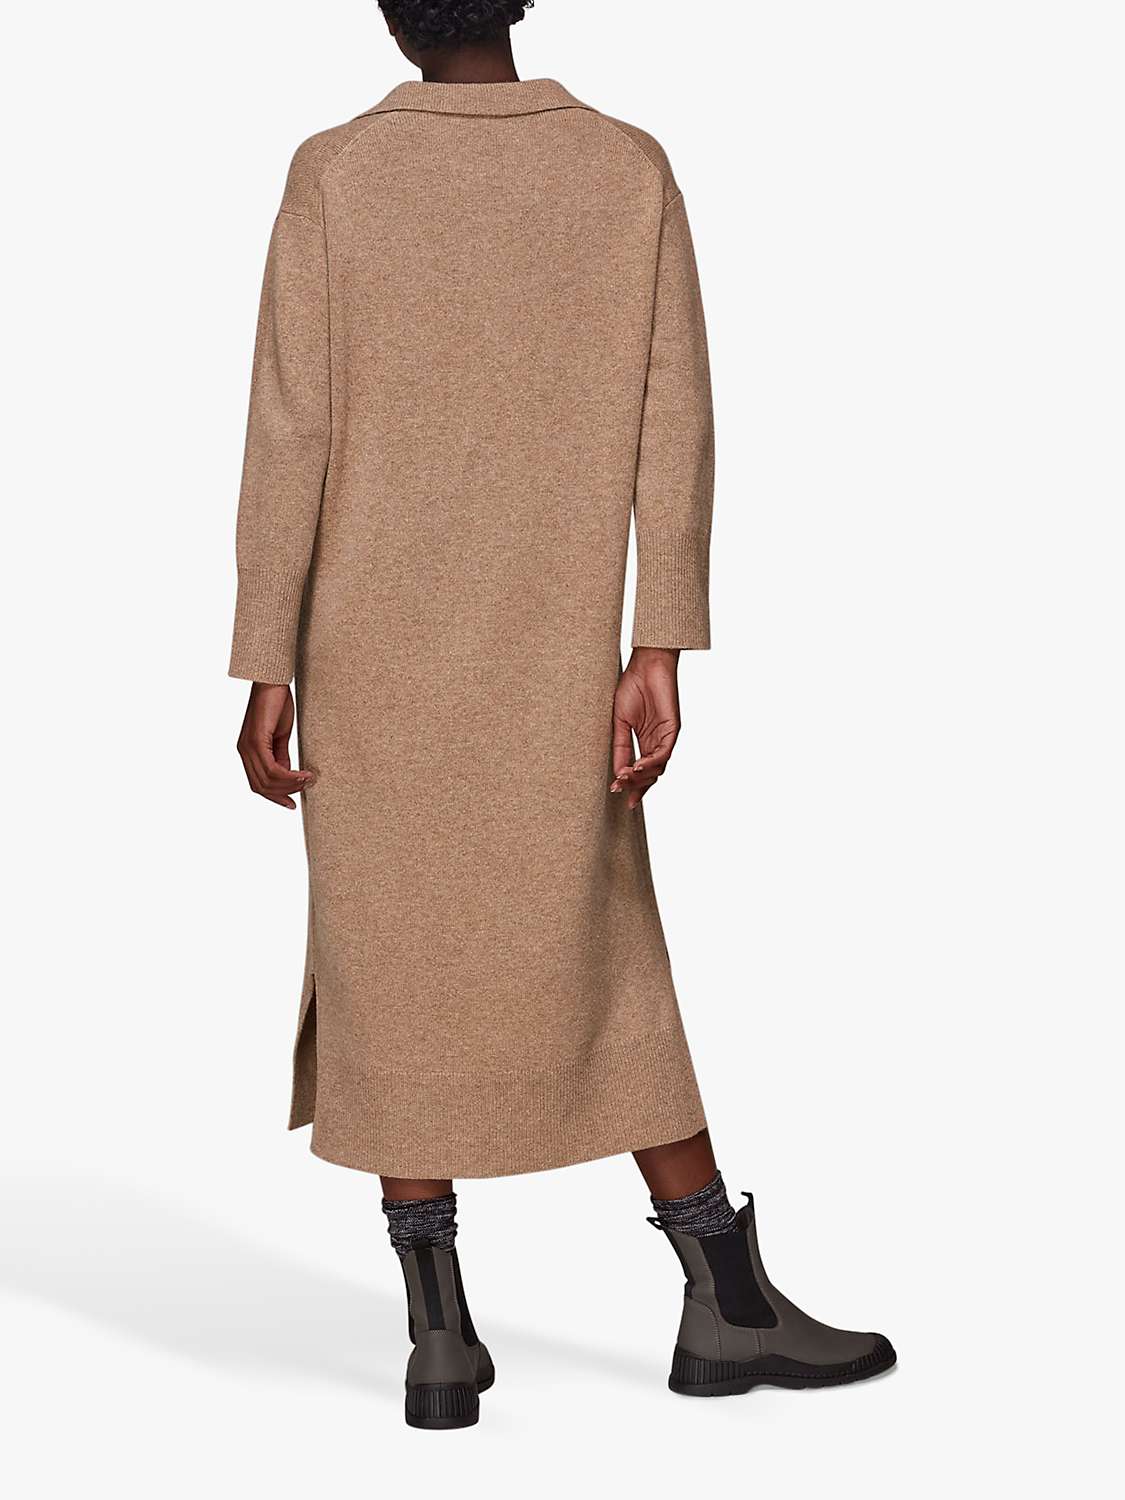 Buy Whistles Wool Blend Collar Knitted Midi Dress Online at johnlewis.com